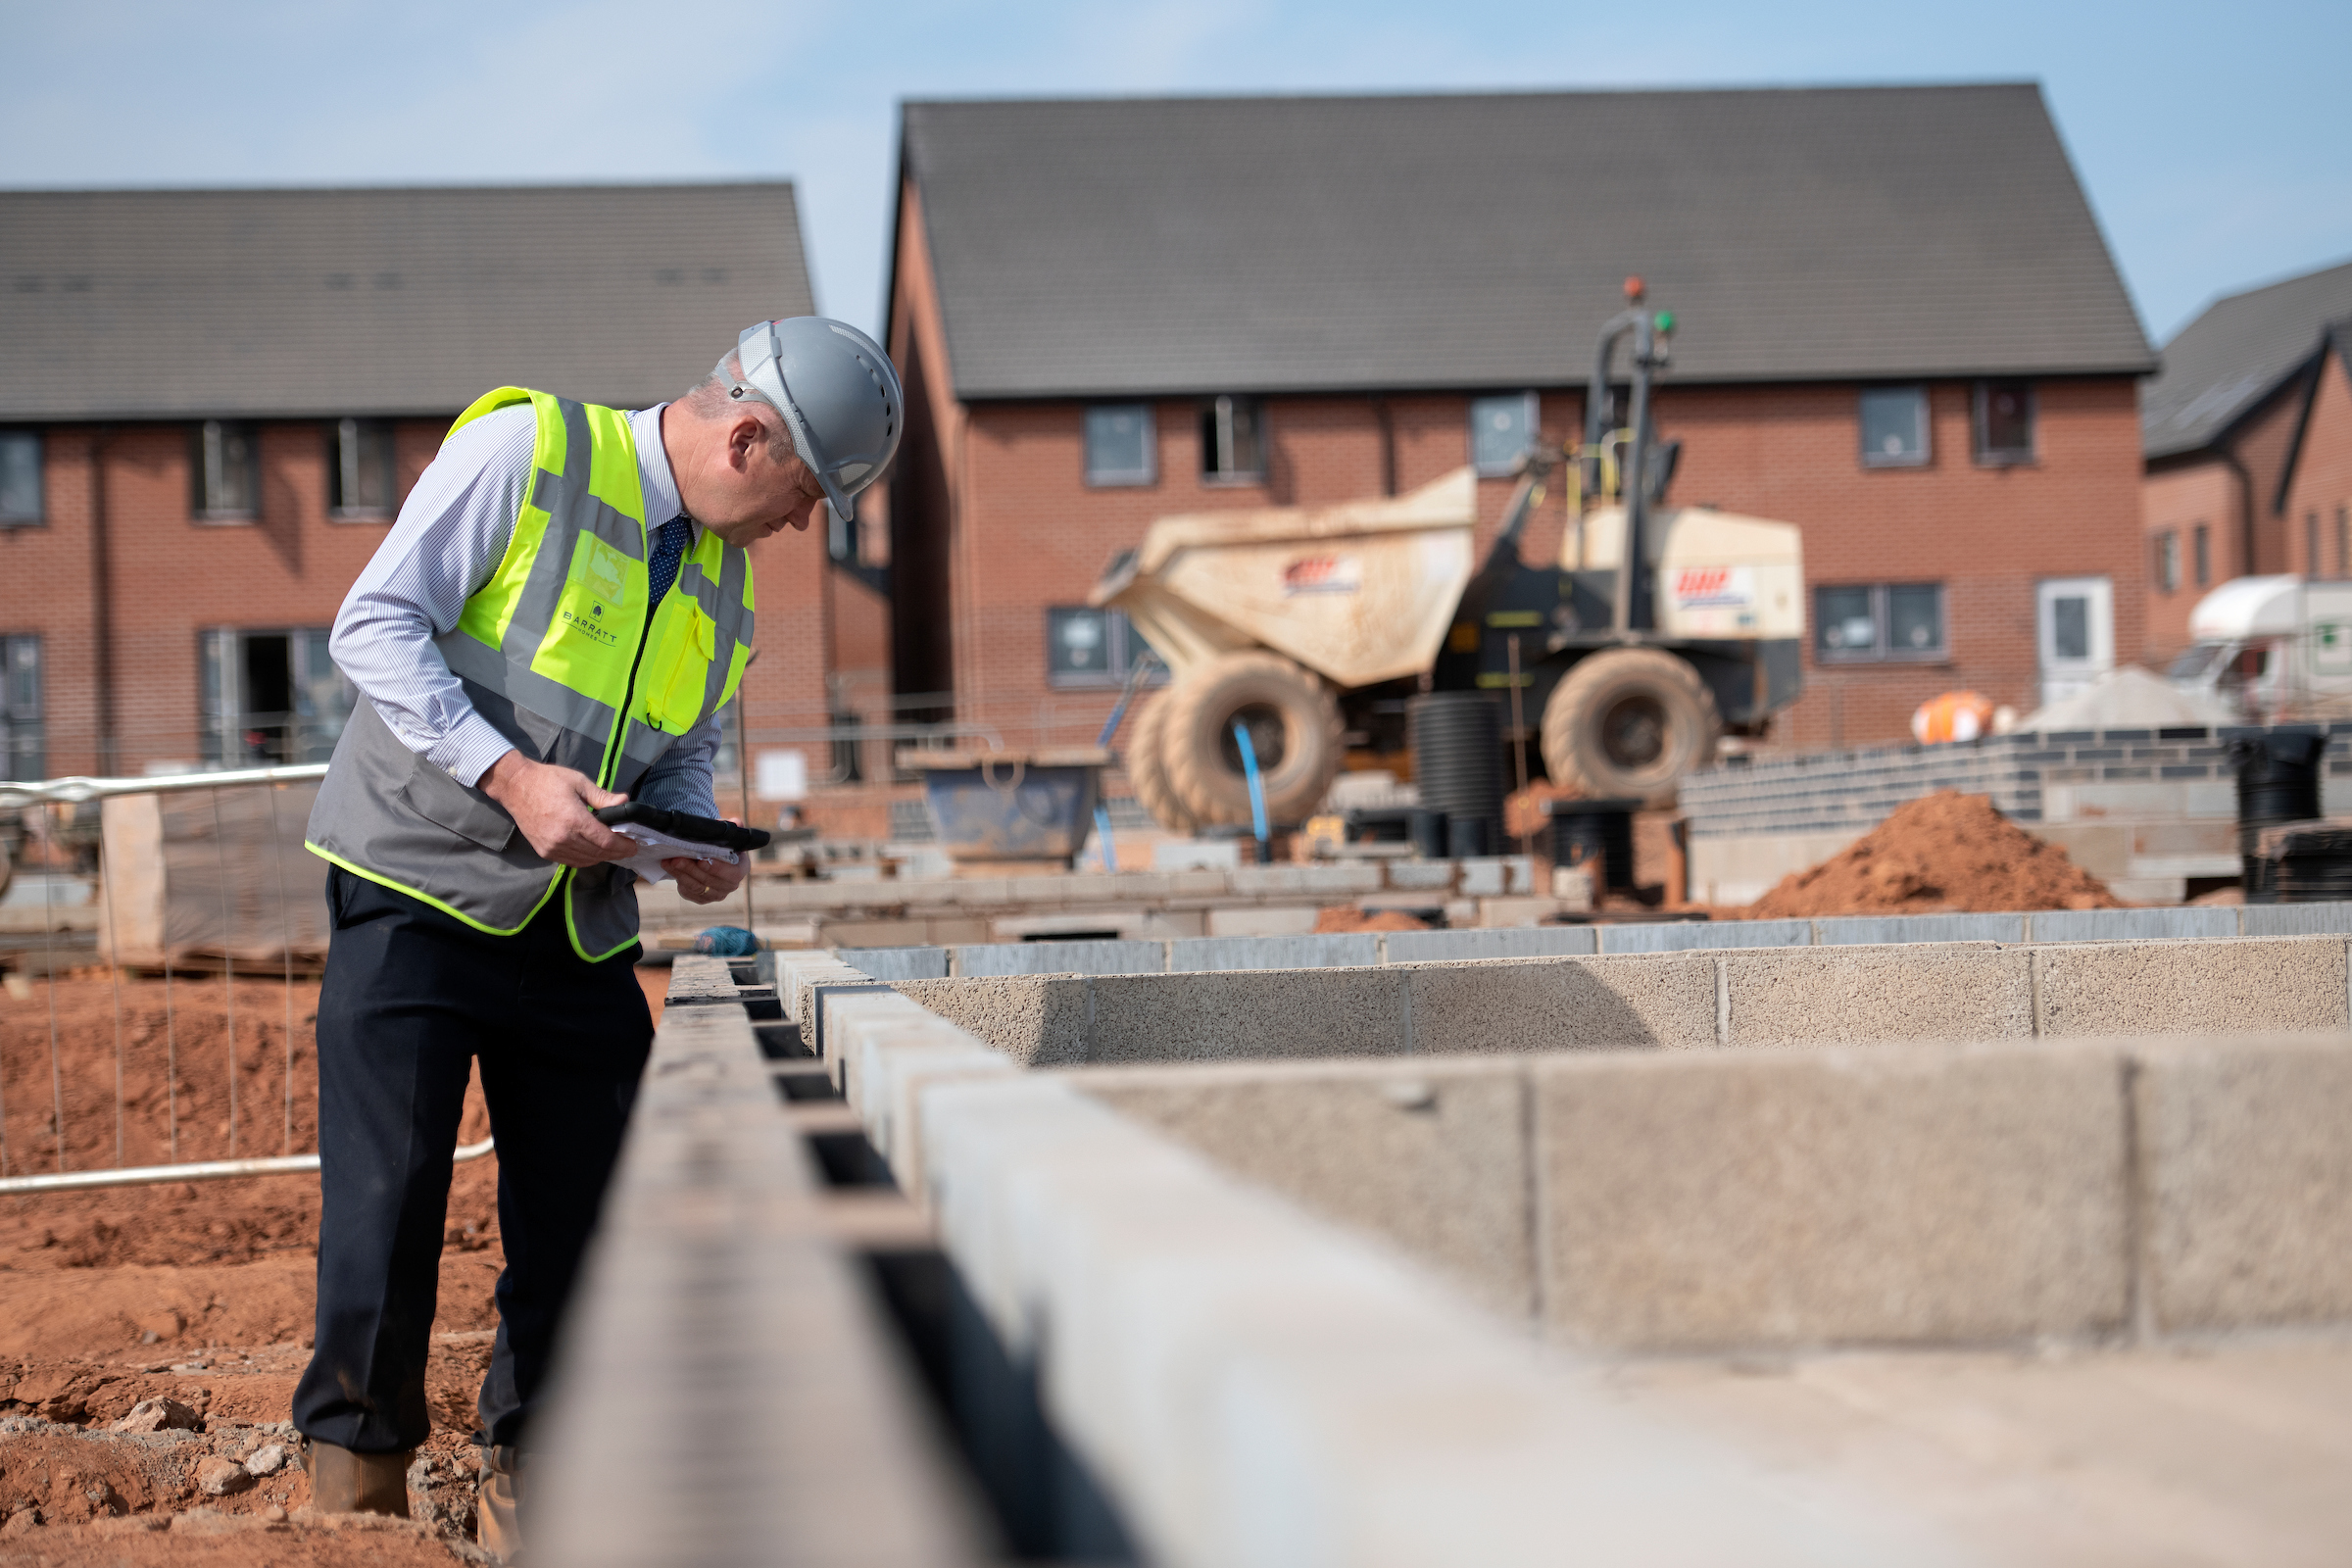 Britain's largest housebuilder set to restart on construction sites in South West from 11th May